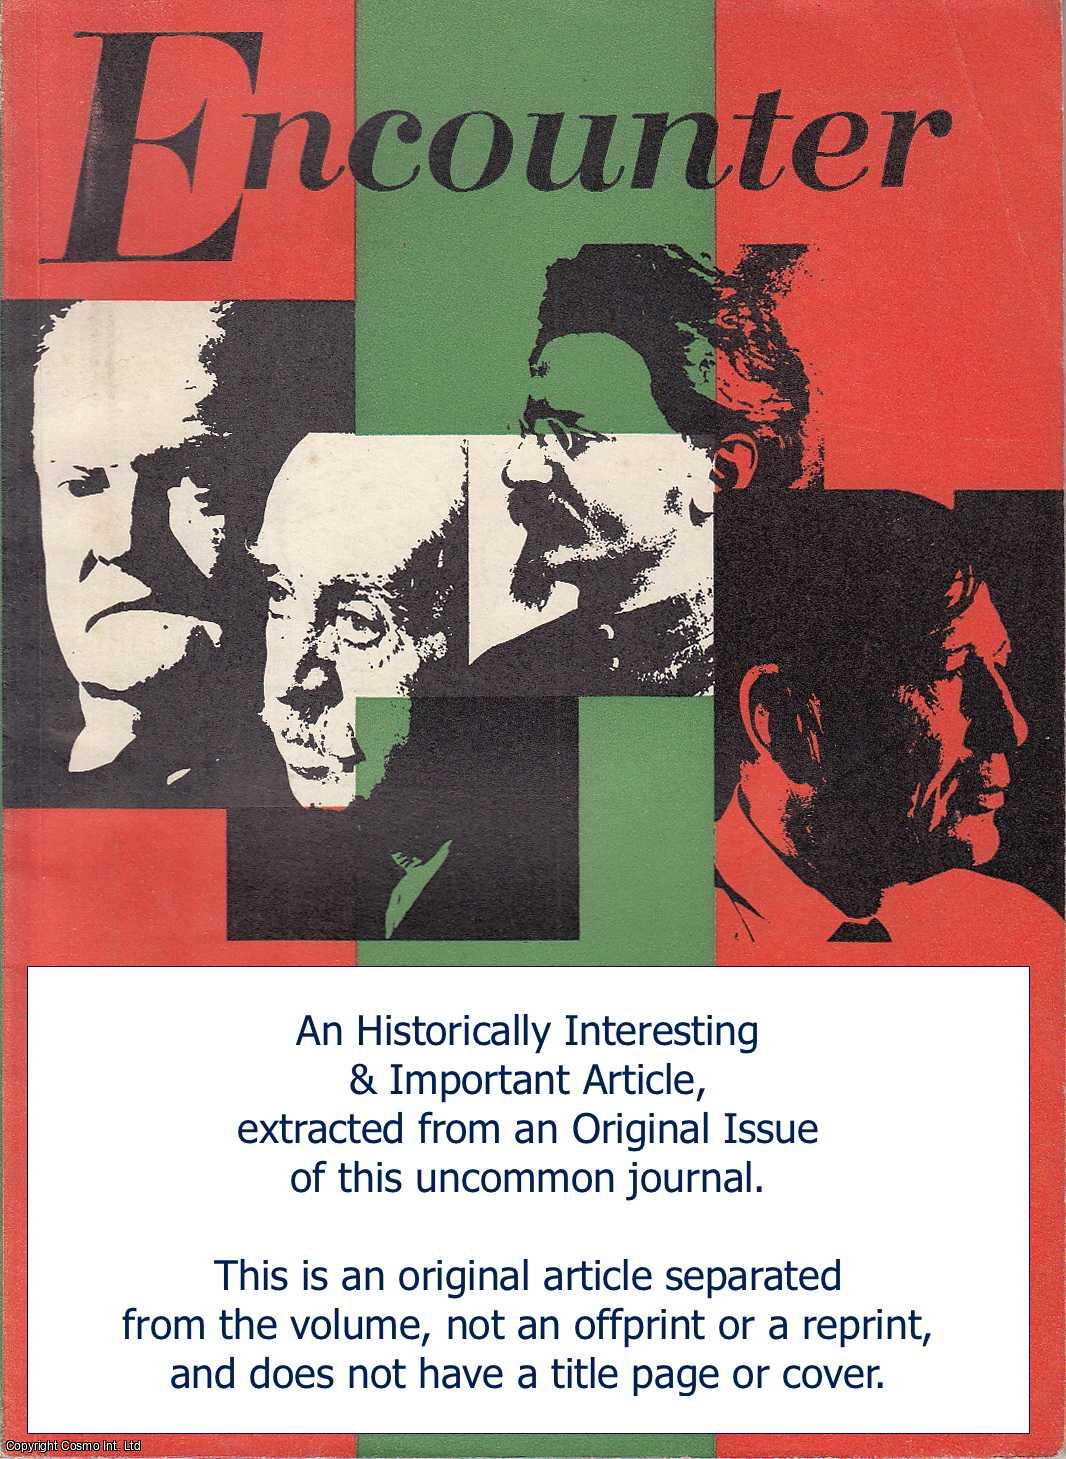 Franz Borkenau - The Secret History of Communism: The Pattern of Communist Revolution, by Hugh Seton-Watson. An original article from Encounter, a monthly review of literature, the arts and politics, 1954.